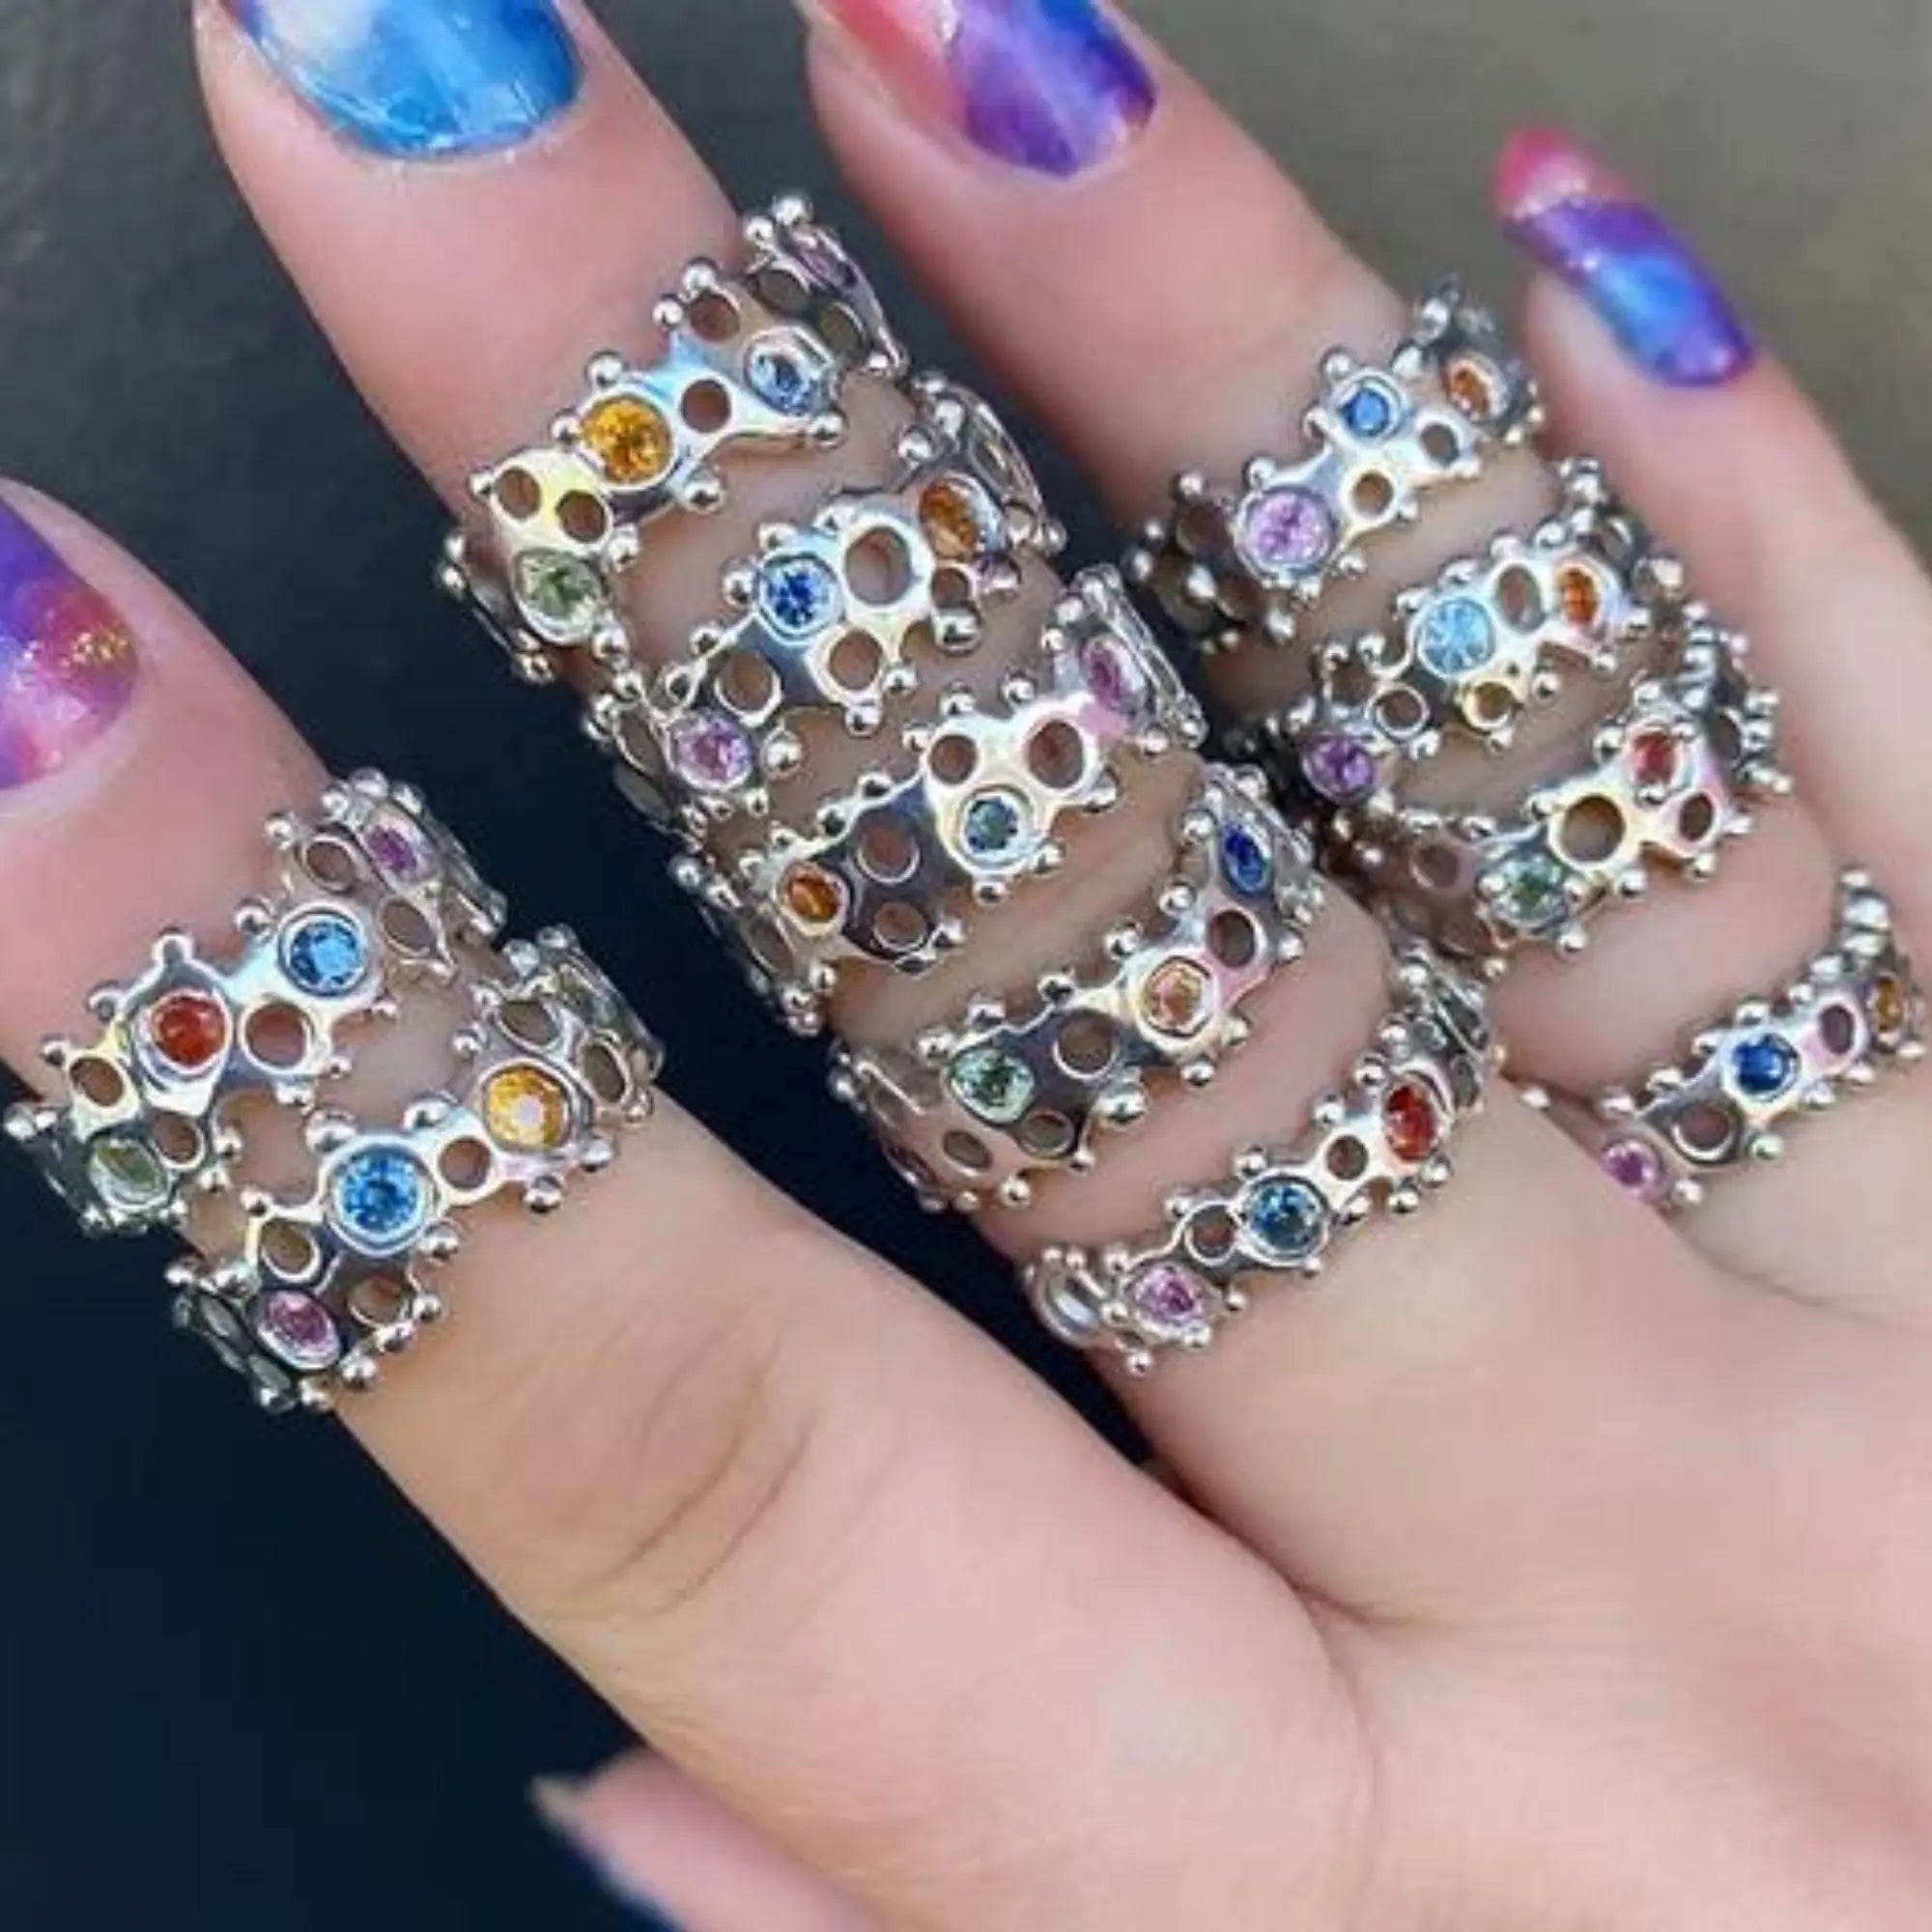 Dazzling silver rings featuring various gemstones, set directly in wax using the popular cast-not-set method, display intricate design and craftsmanship